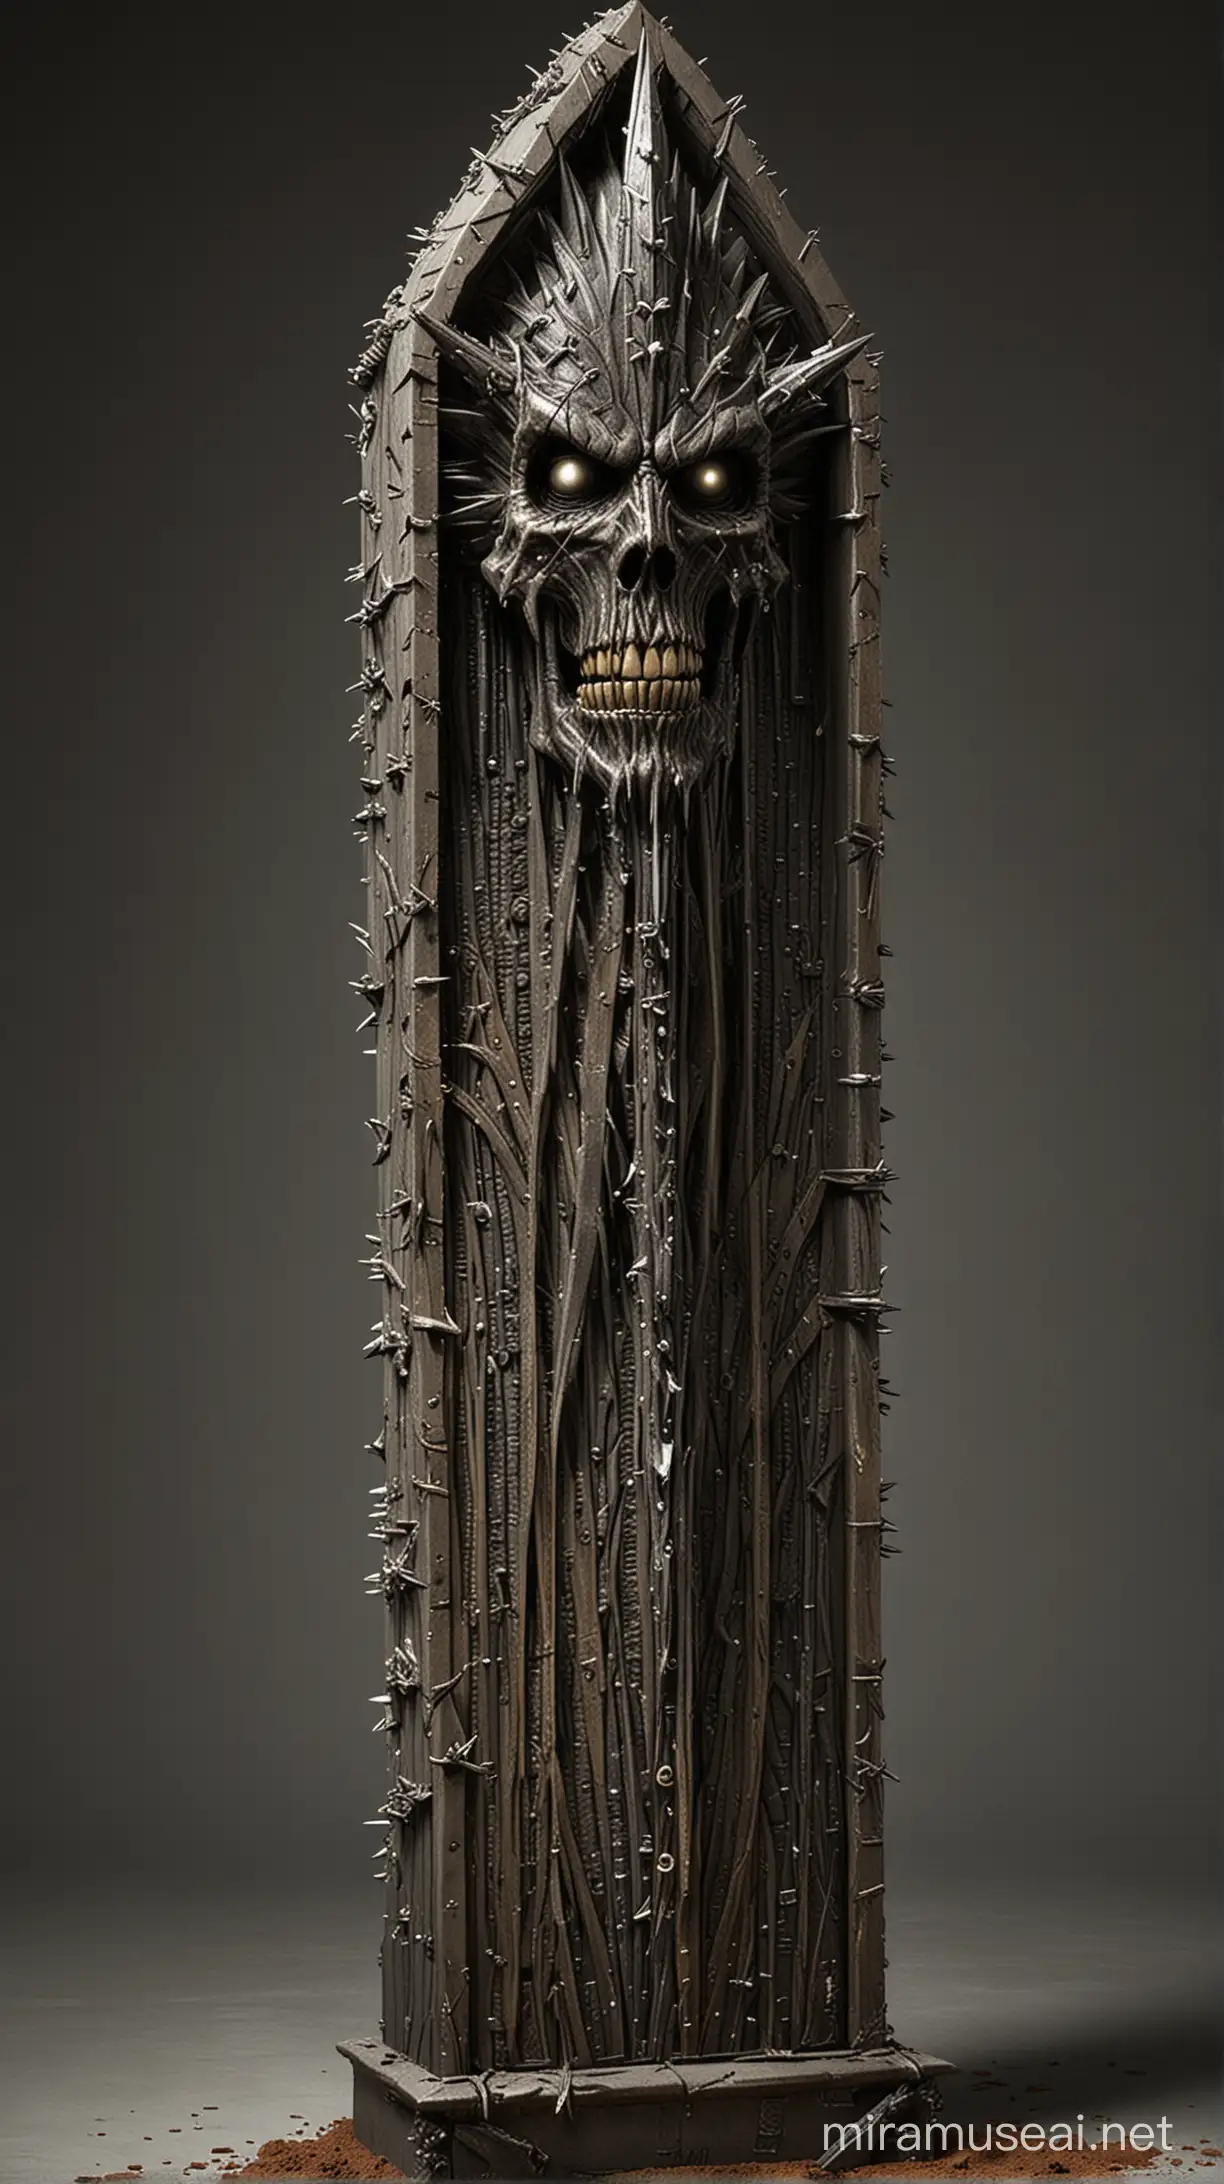 Create an image depicting a tall coffin-like structure covered in sharp spikes on the inside, known as the Iron Maiden.

